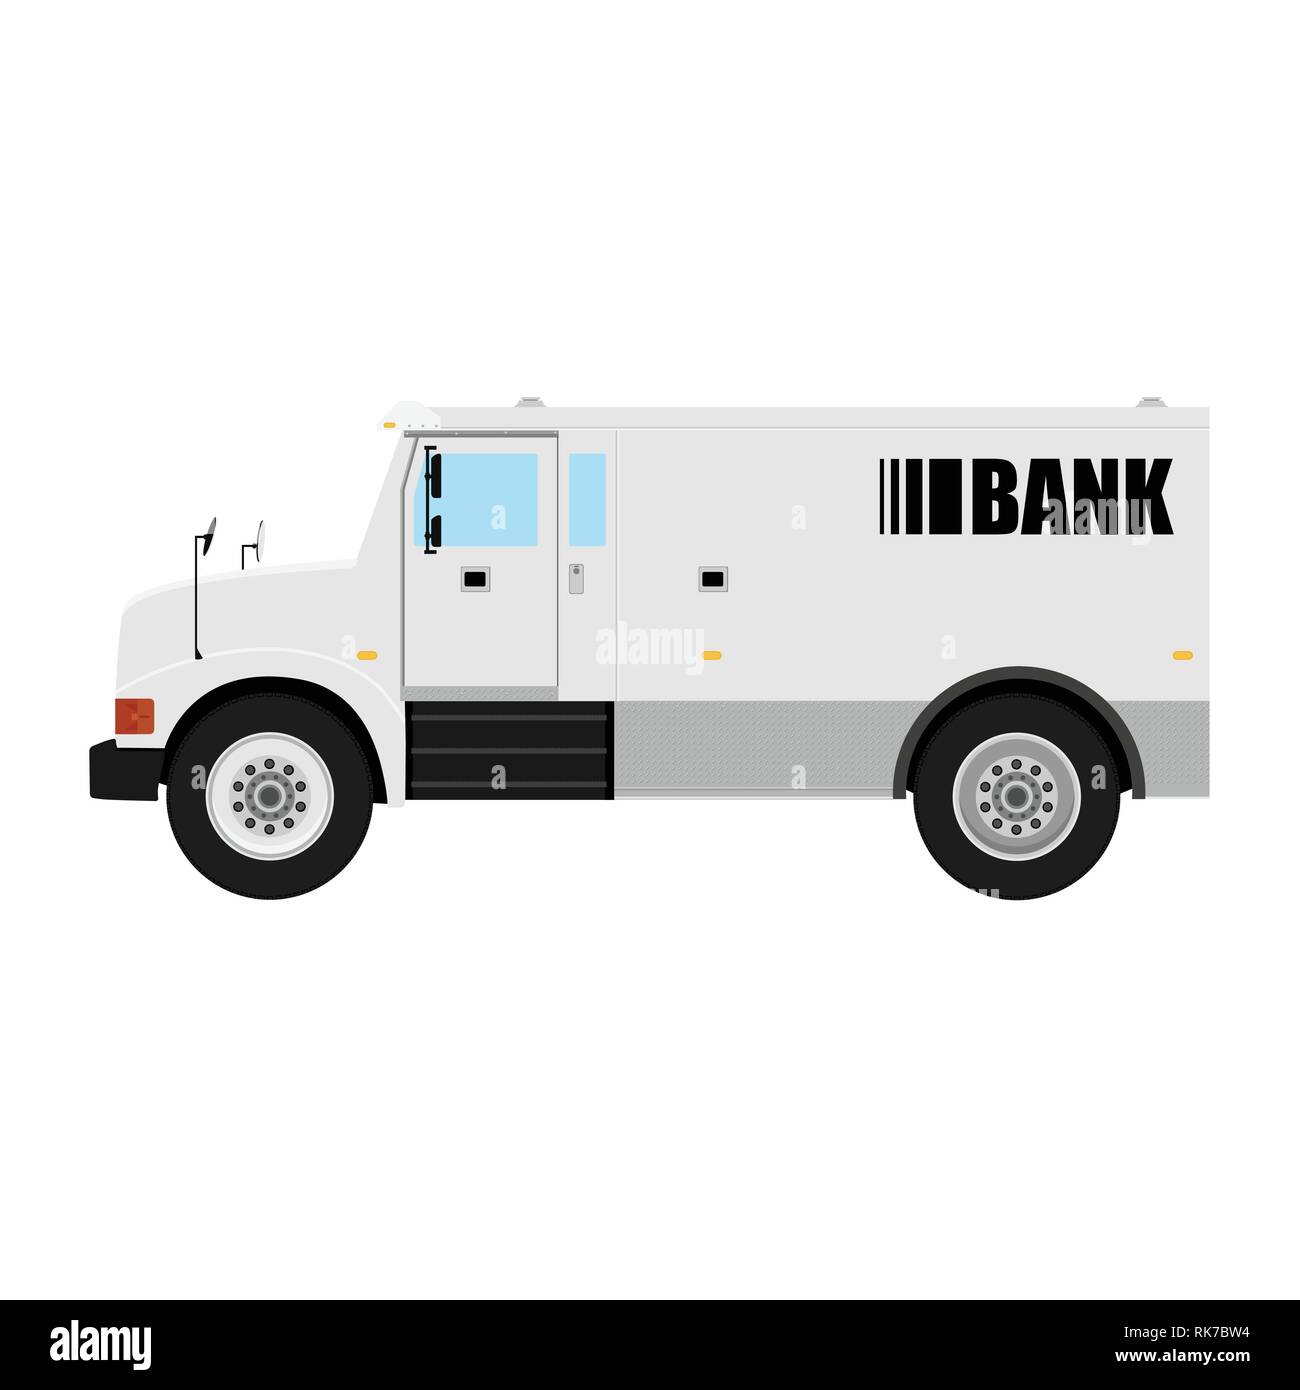 Armored cash truck side view. Utility security van vehicle. Vector isolated illustration. Stock Vector